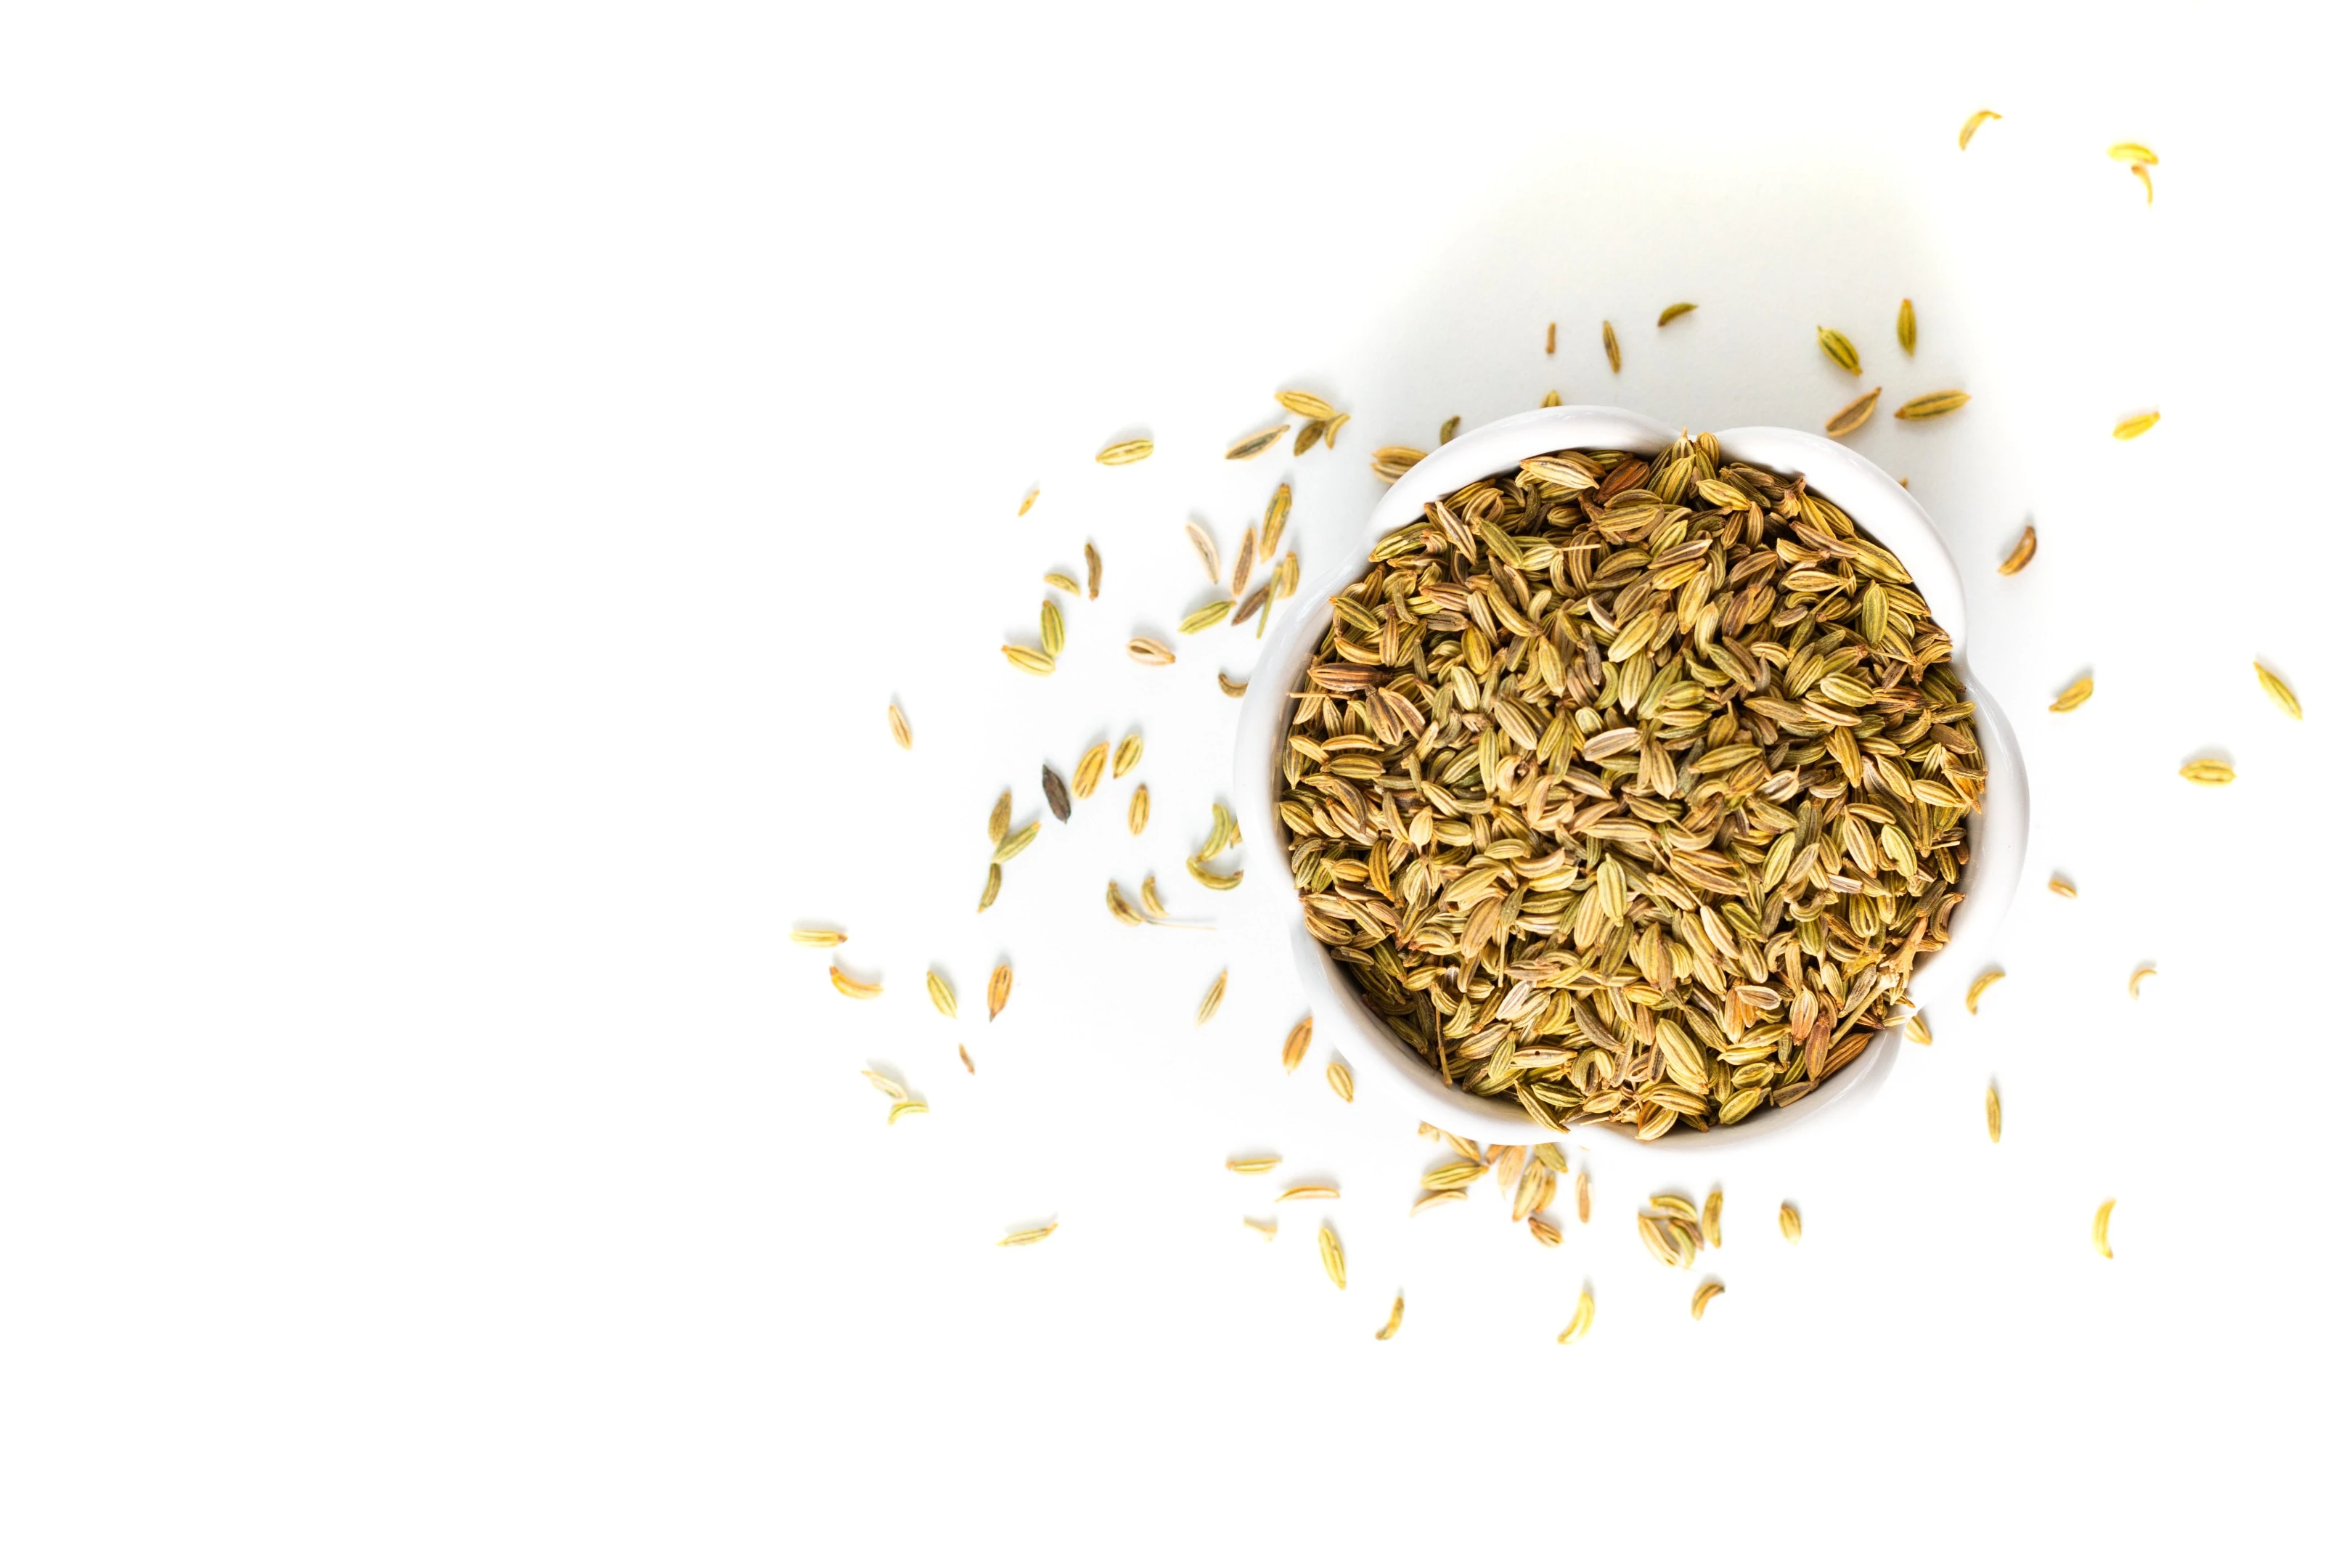 Fennel seeds on white background